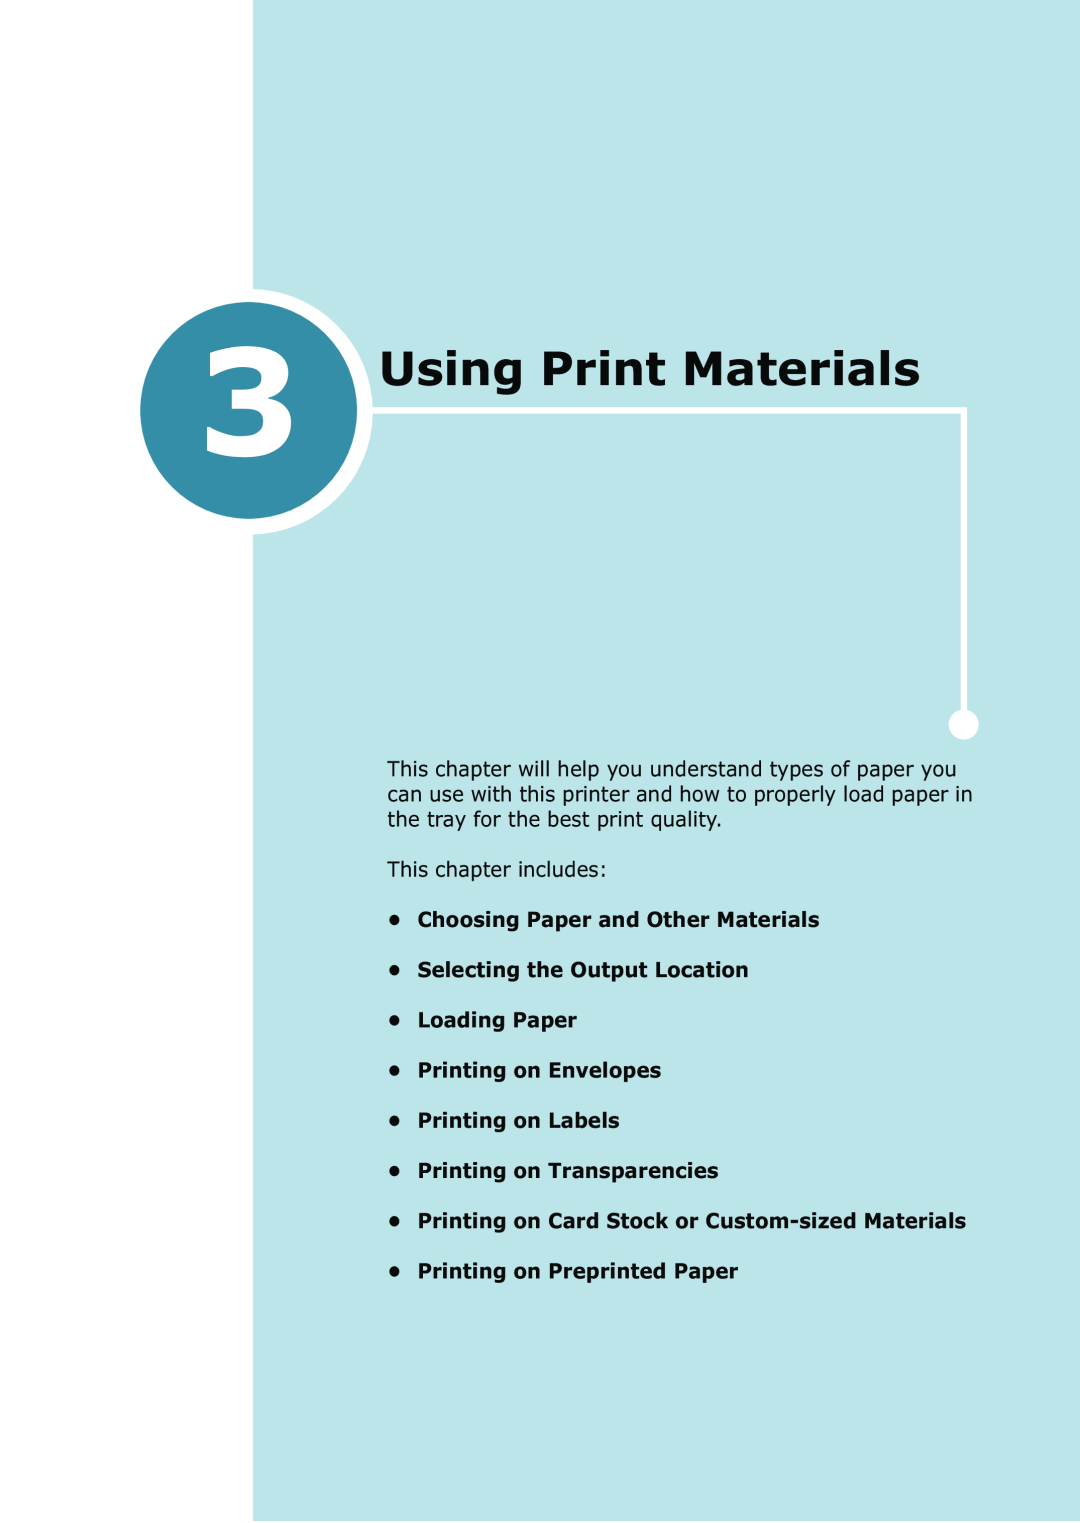 Samsung ML-1520 manual Using Print Materials, Choosing Paper and Other Materials Selecting the Output Location 